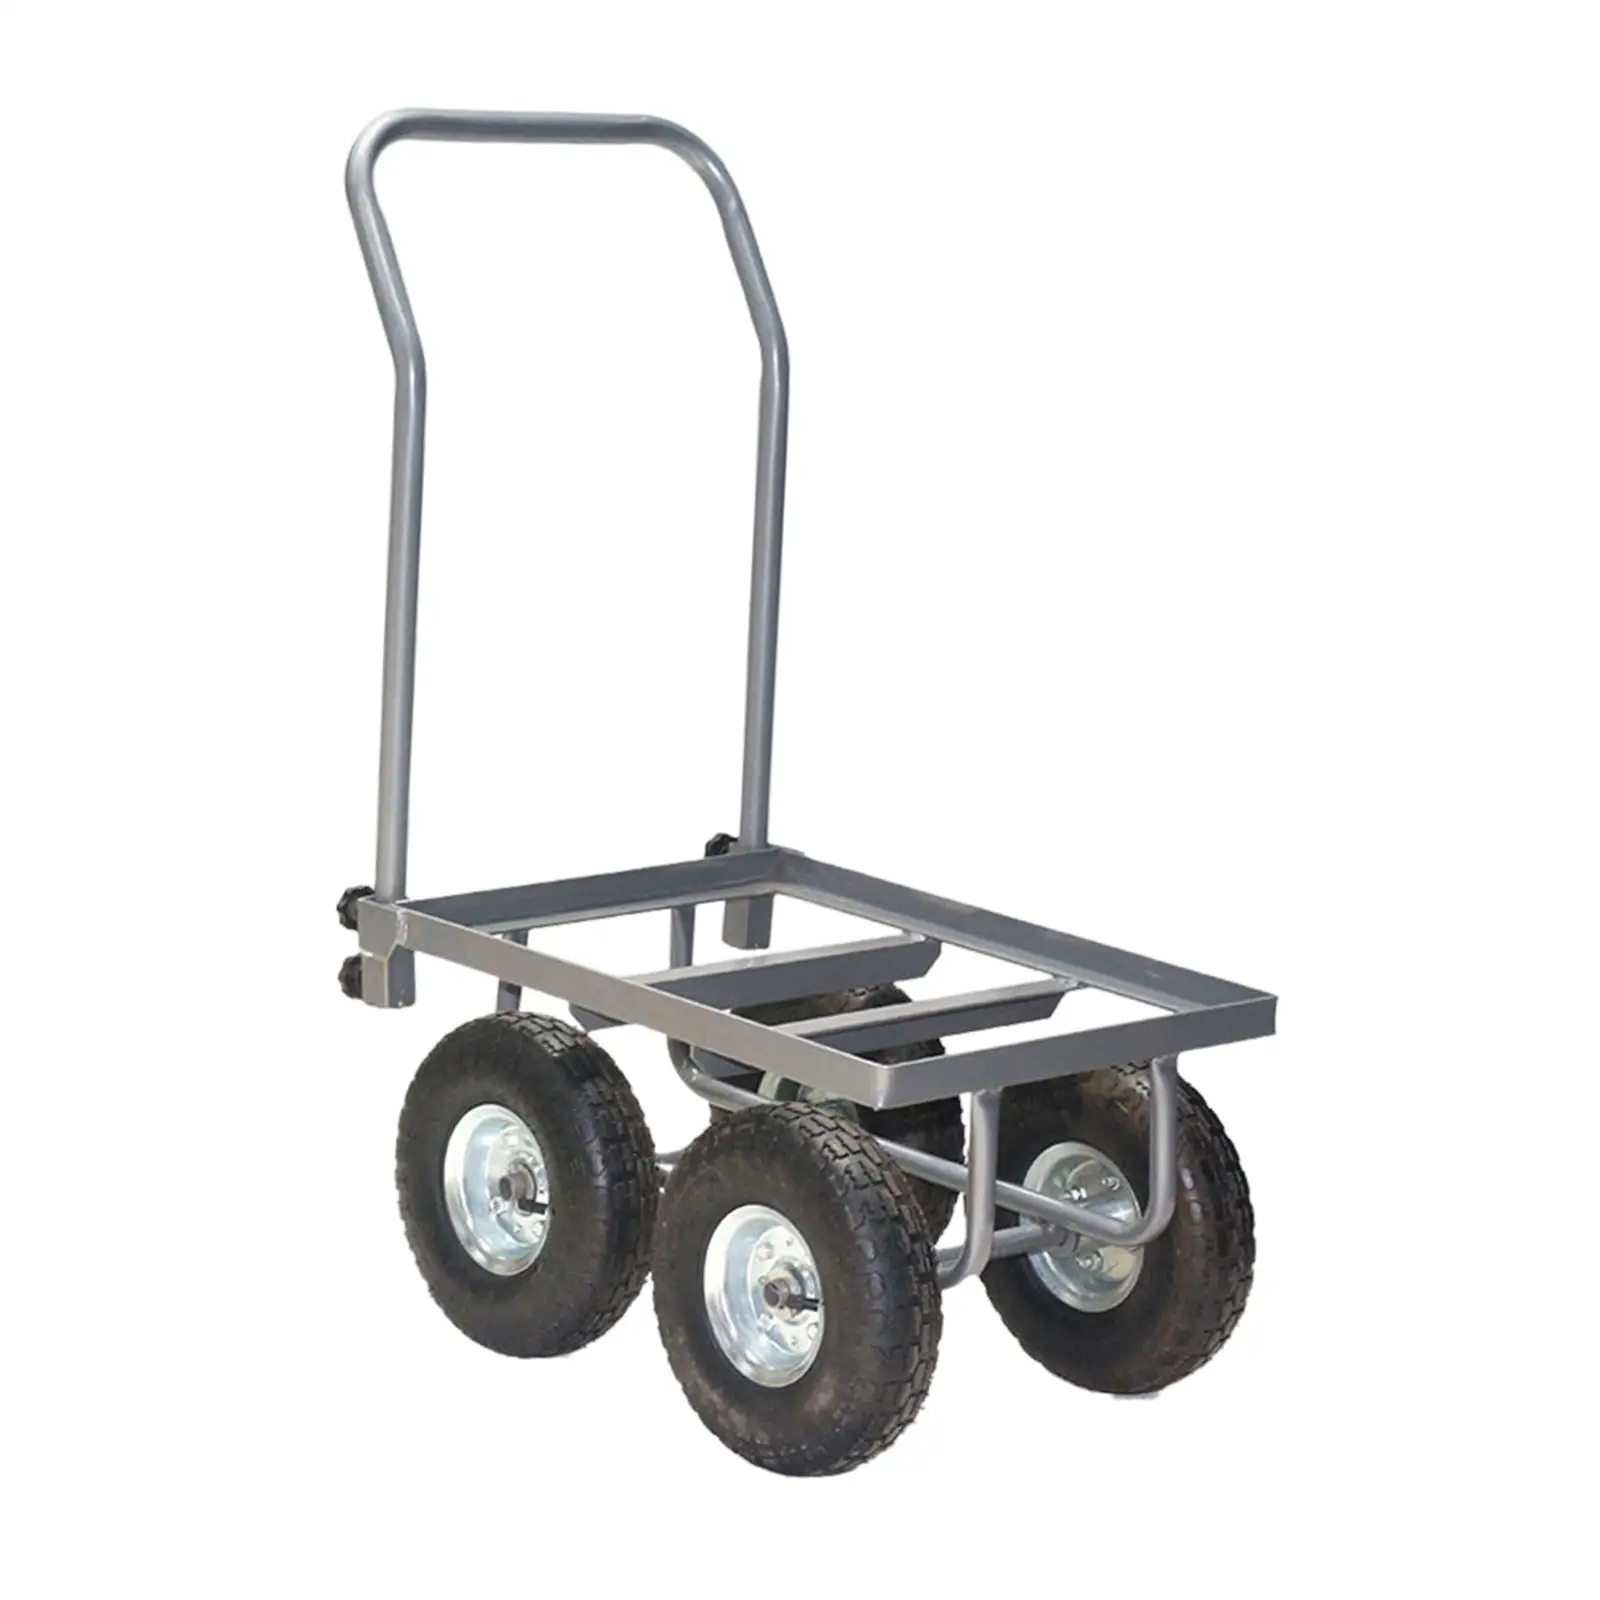 Moving Flatbed Cart Heavy Duty Platform Trolley Foldable Hand Truck for Moving